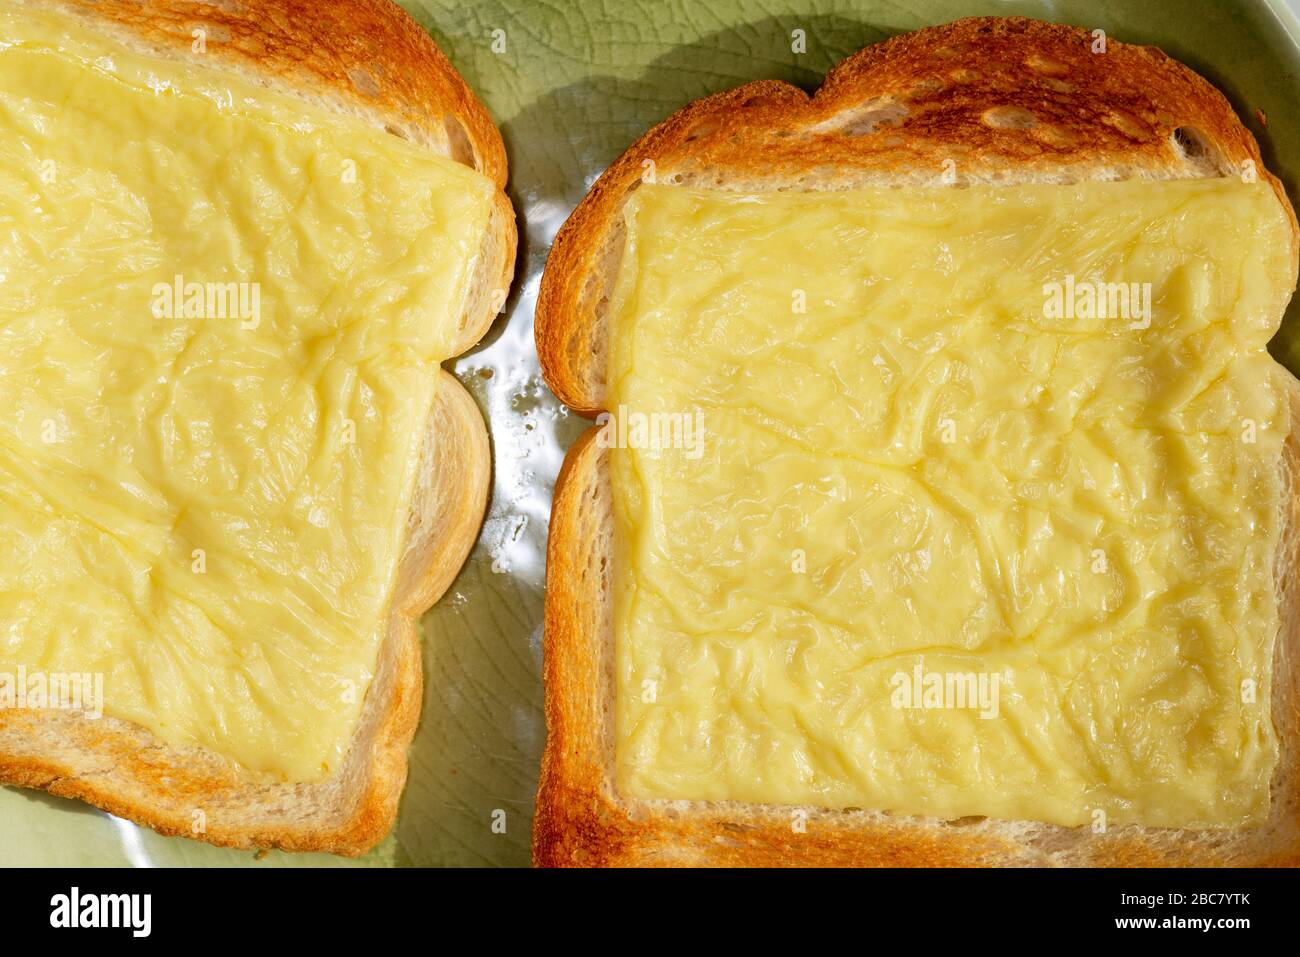 Processed cheese slices grilled on toast Stock Photo